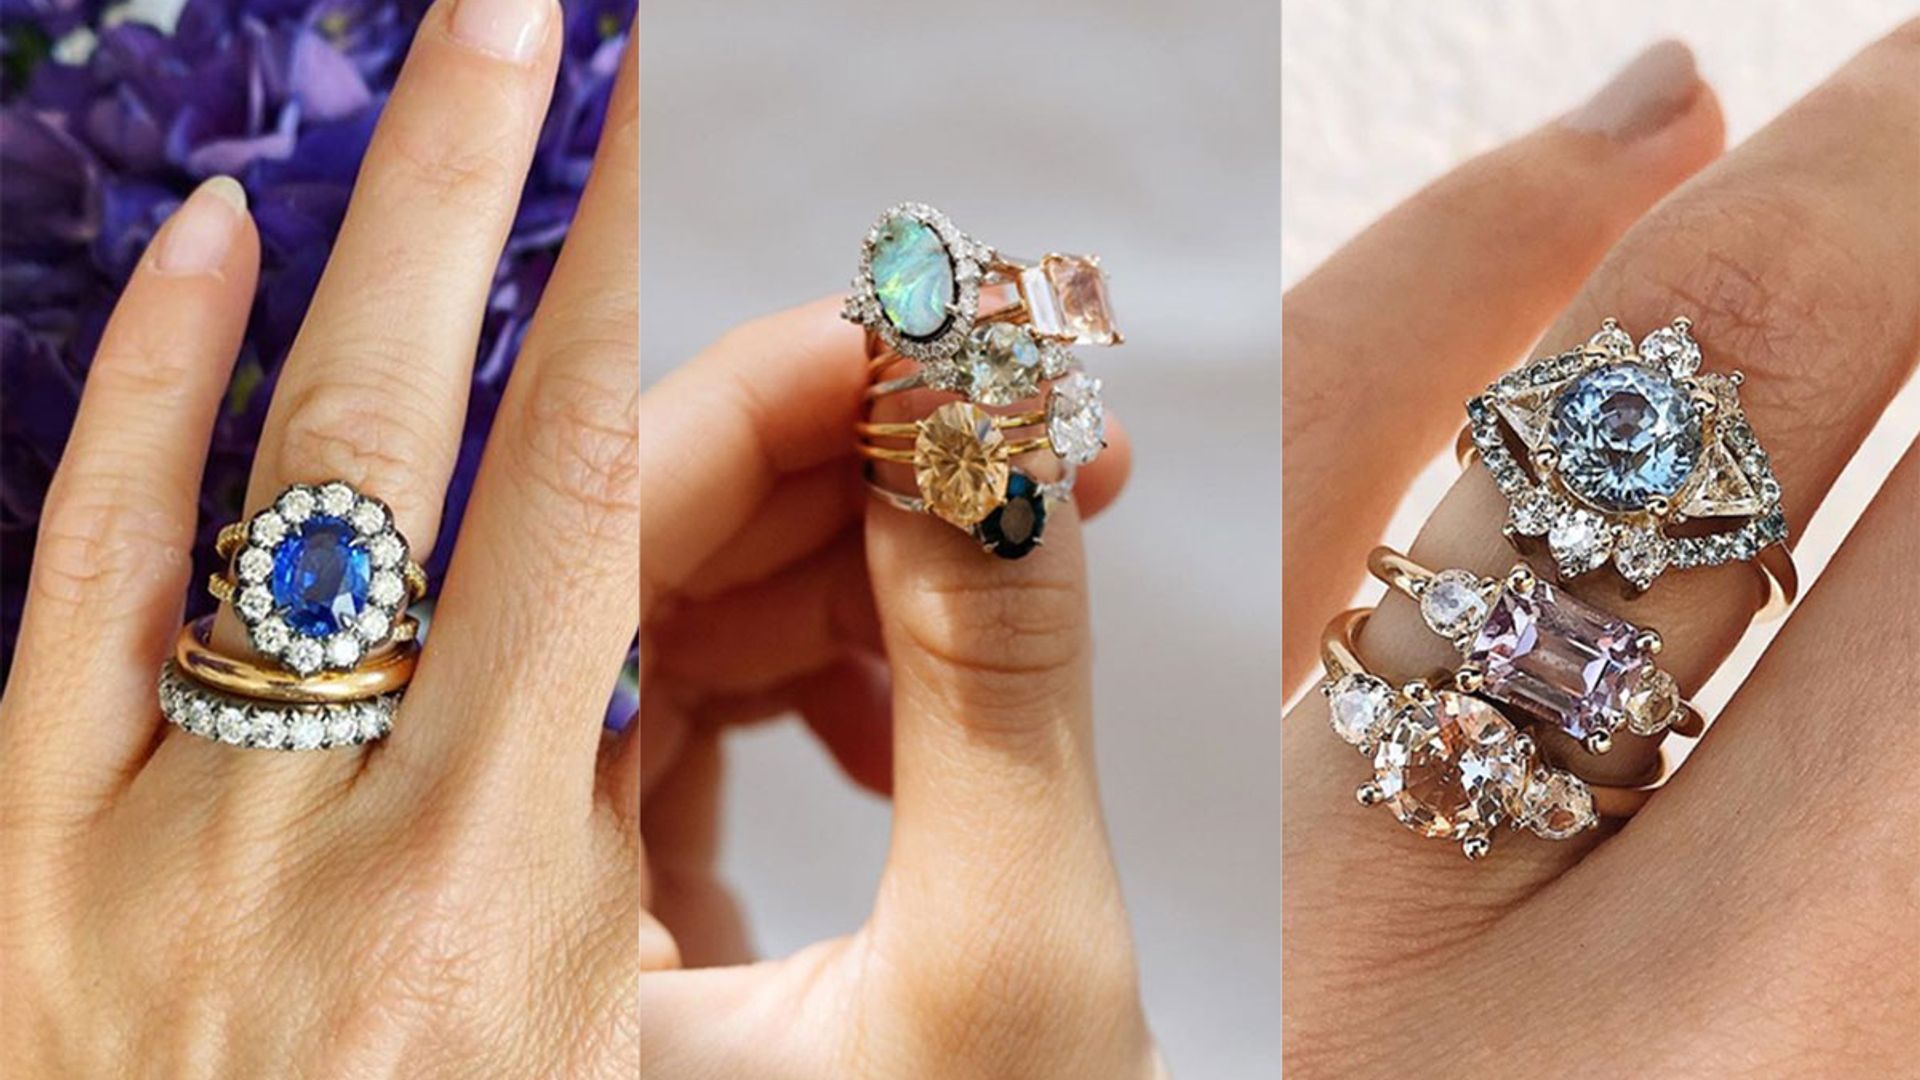 Engagement ring inspiration: 13 breathtakingly beautiful designs from Instagram